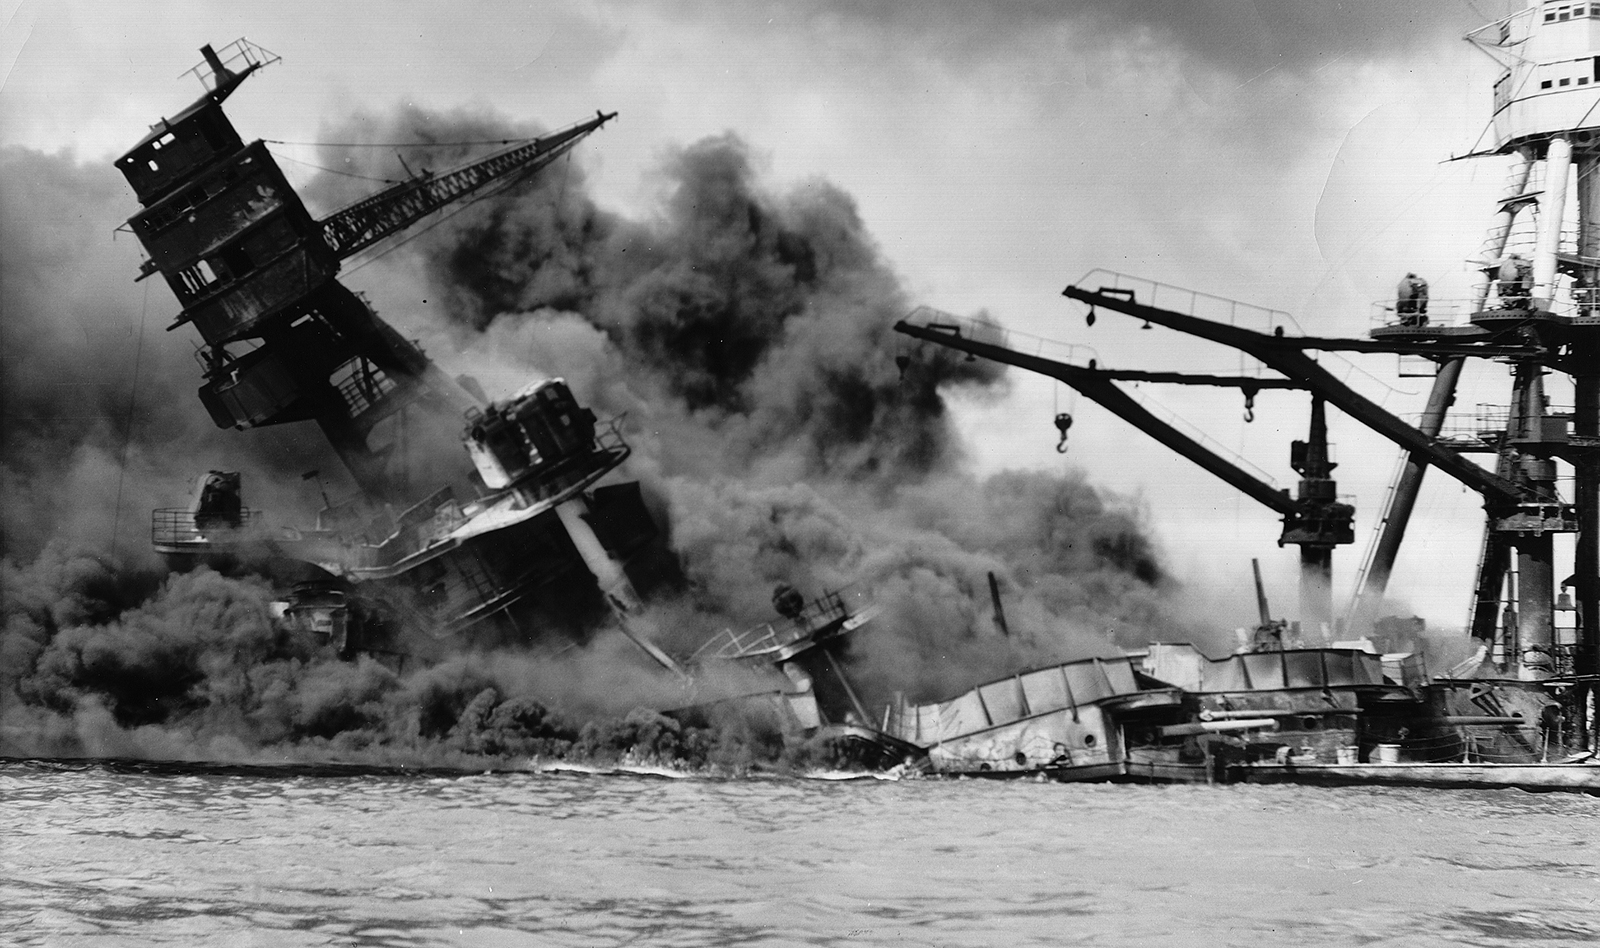 7.12.1941 Japan attacked Pearl Harbor